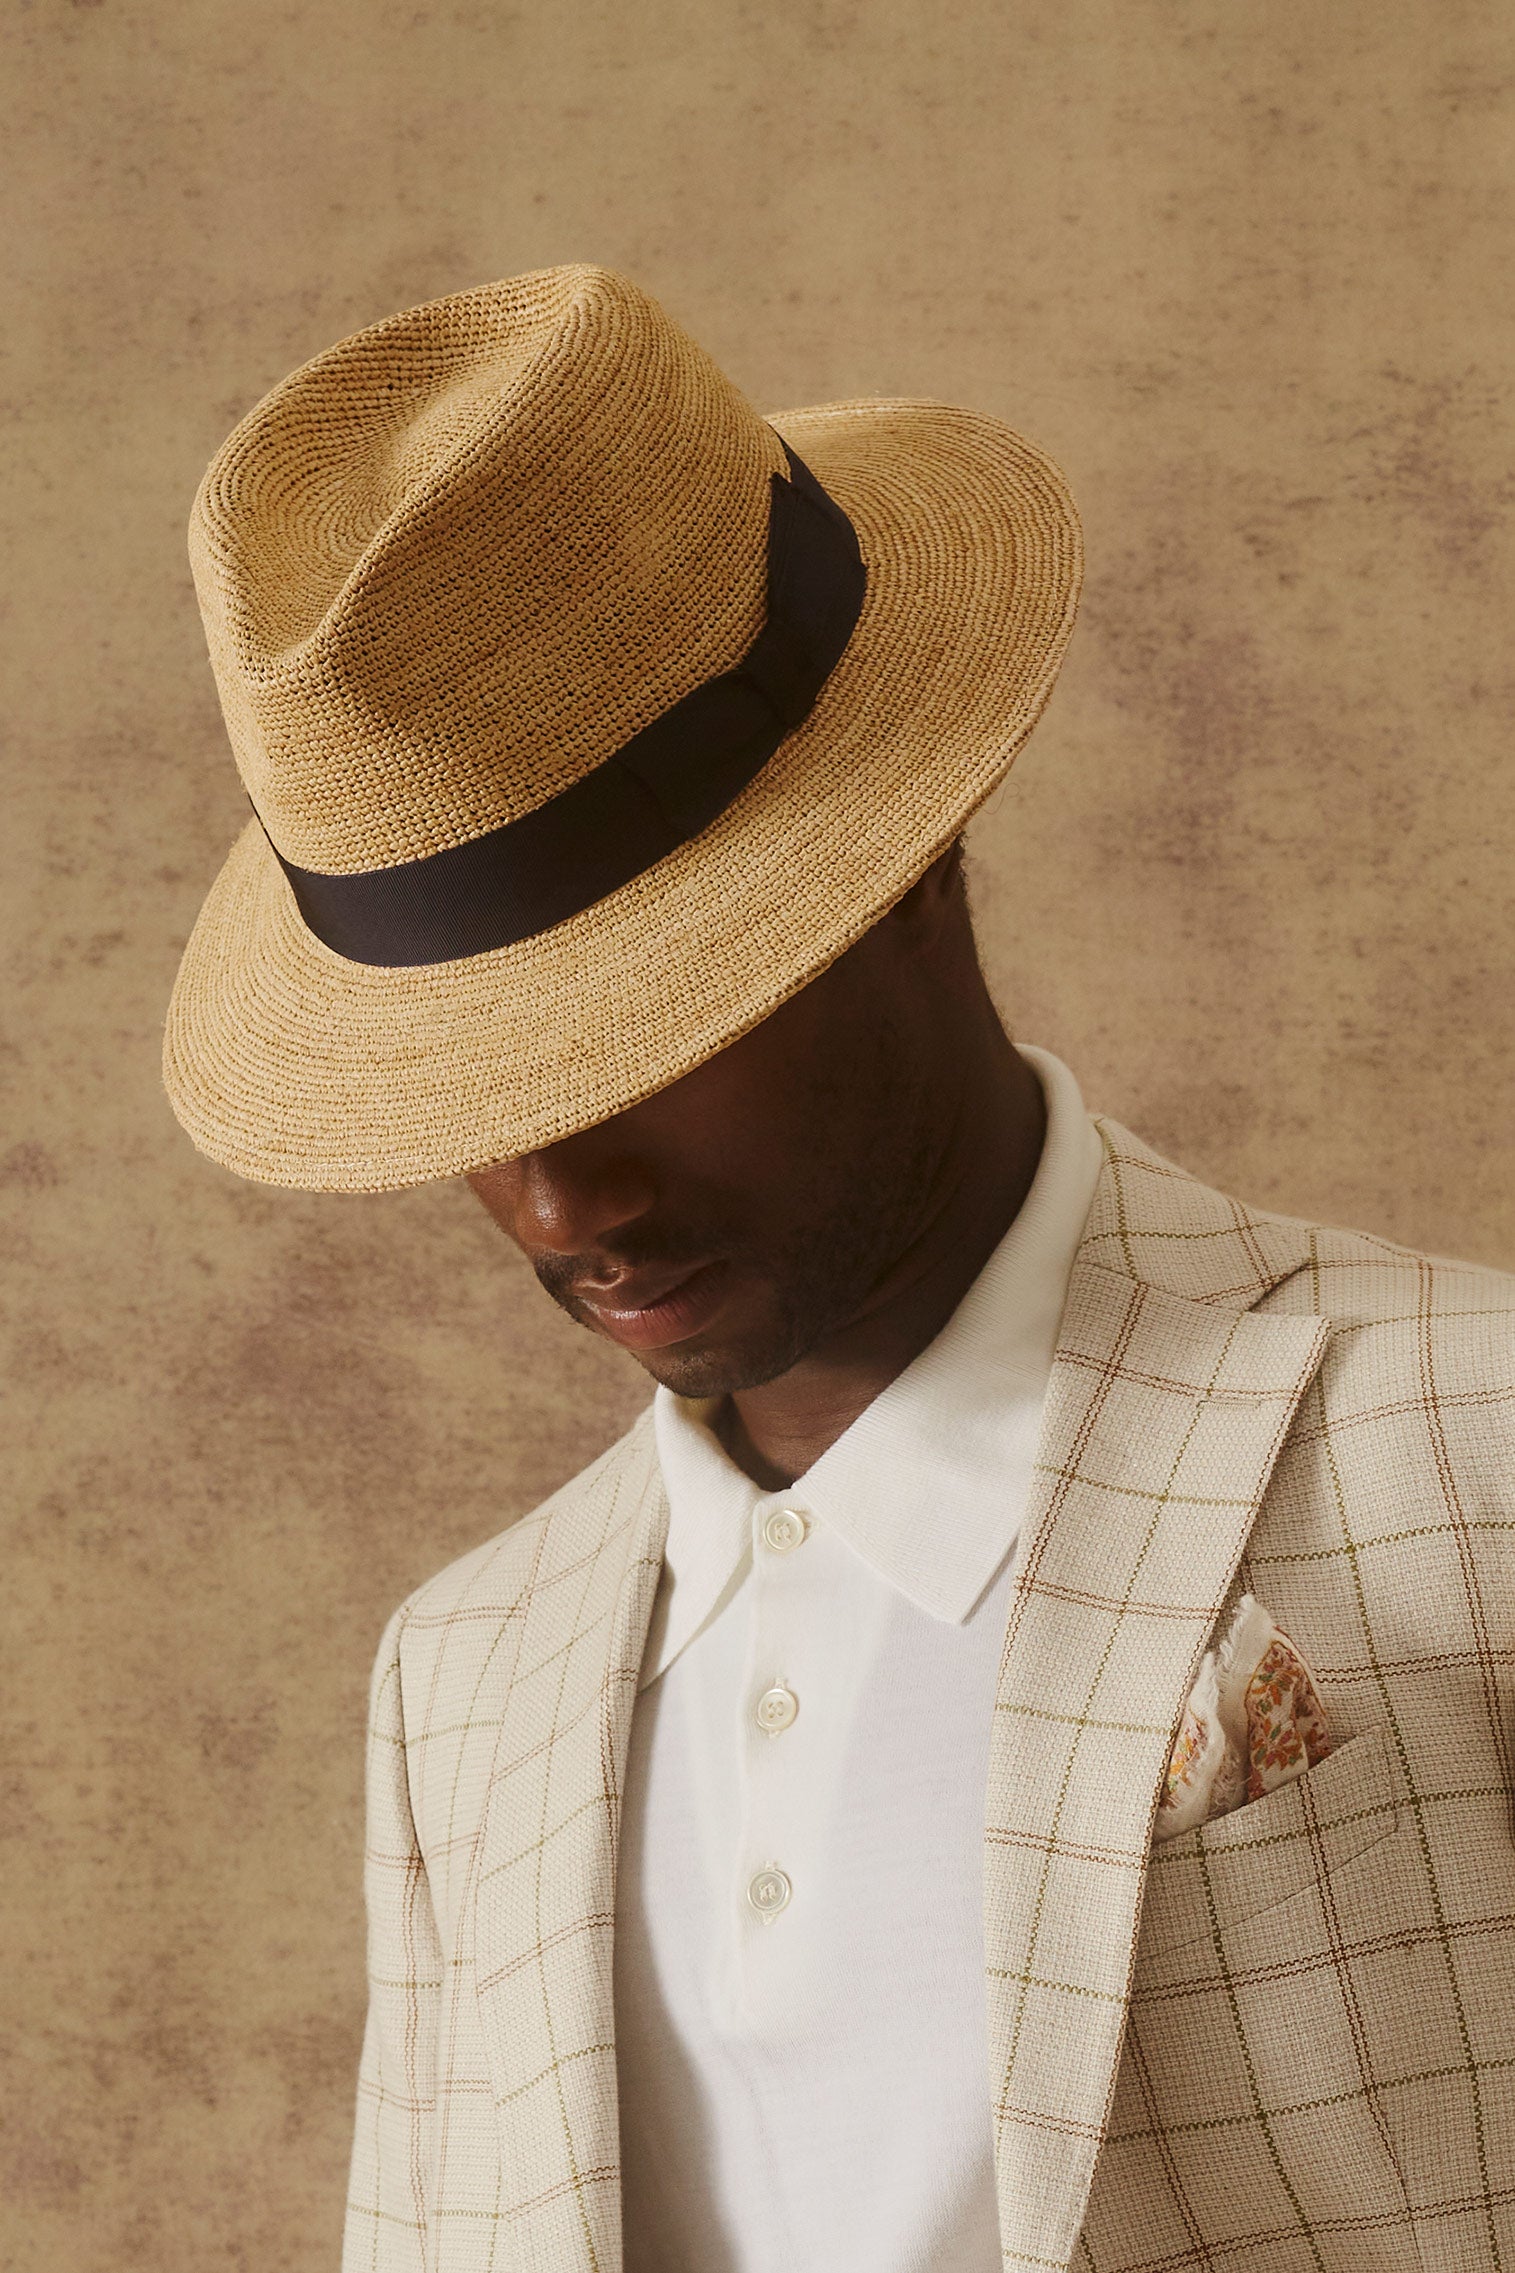 St Louis Trilby - Panamas, Straw and Sun Hats for Men - Lock & Co. Hatters London UK